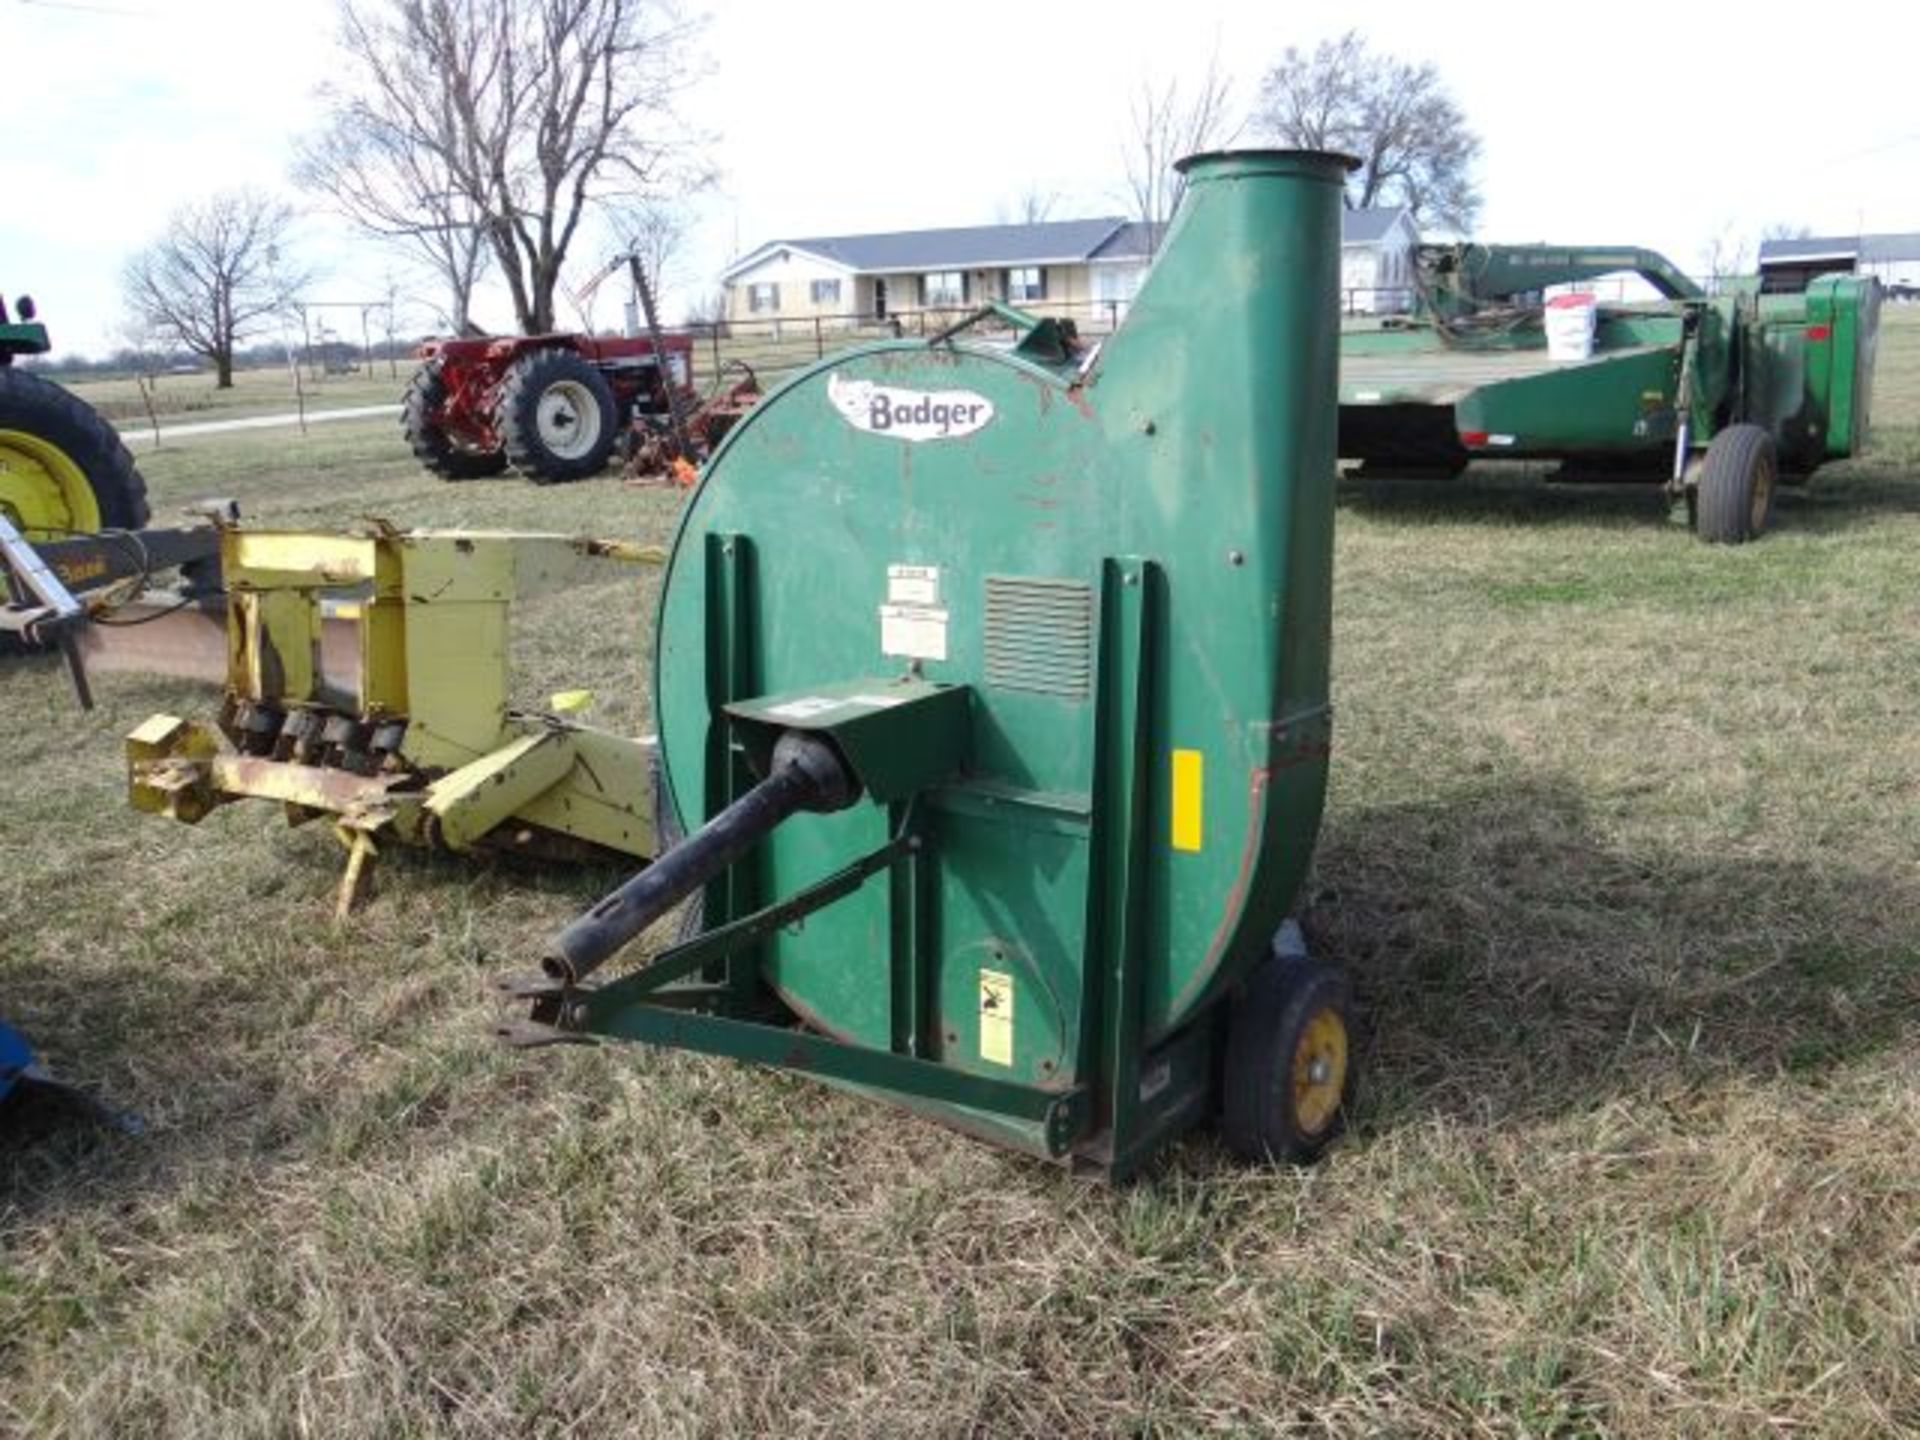 Badger BN2054 Silage Blower Used Last Fall - Image 2 of 3